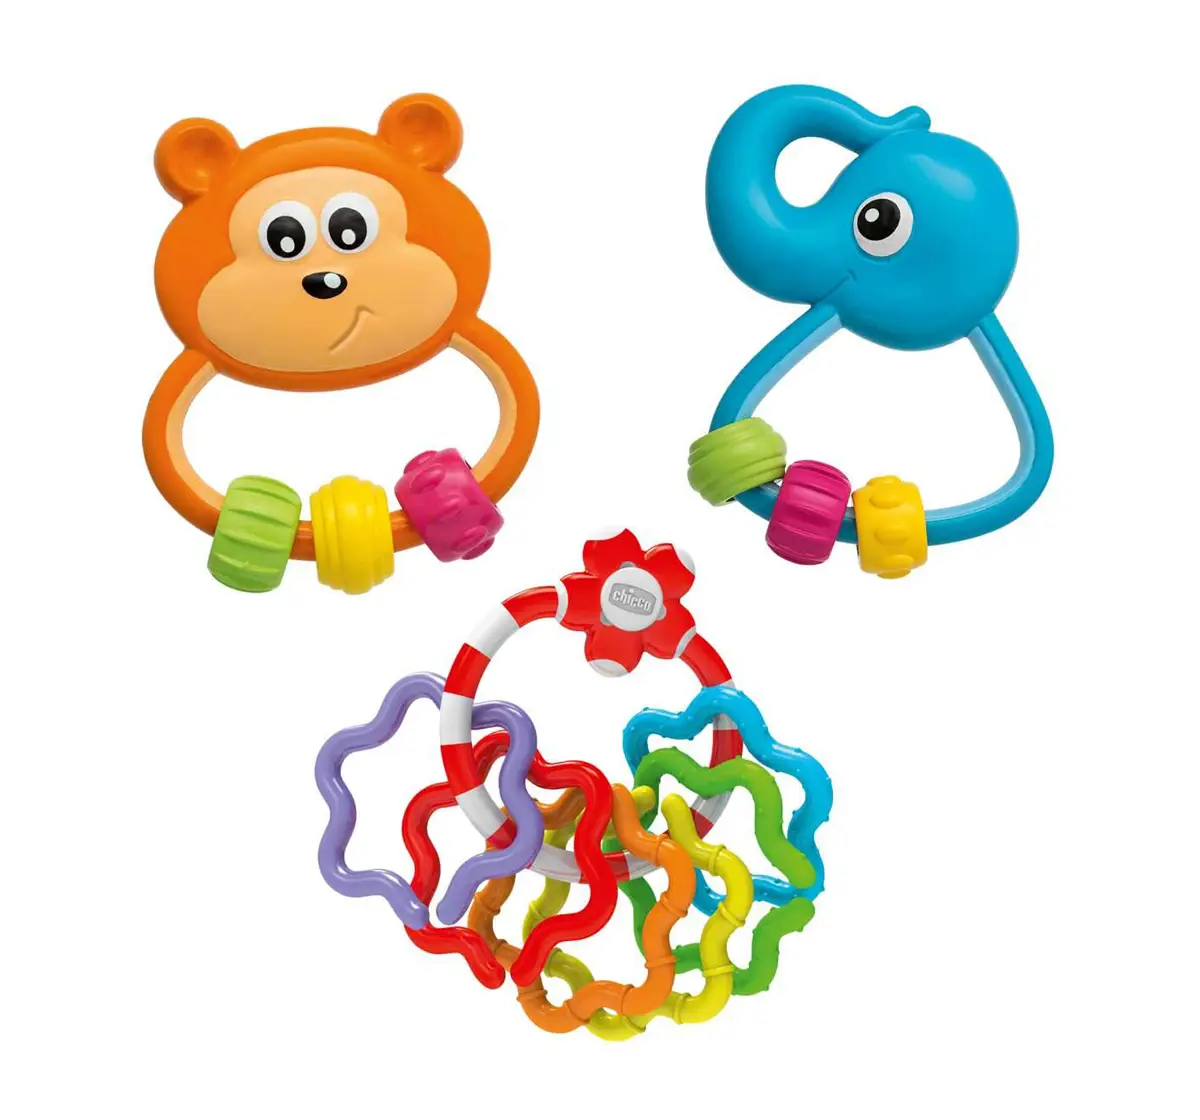 Chicco Play Set of Teethers & Rattles for Kids age 3M+